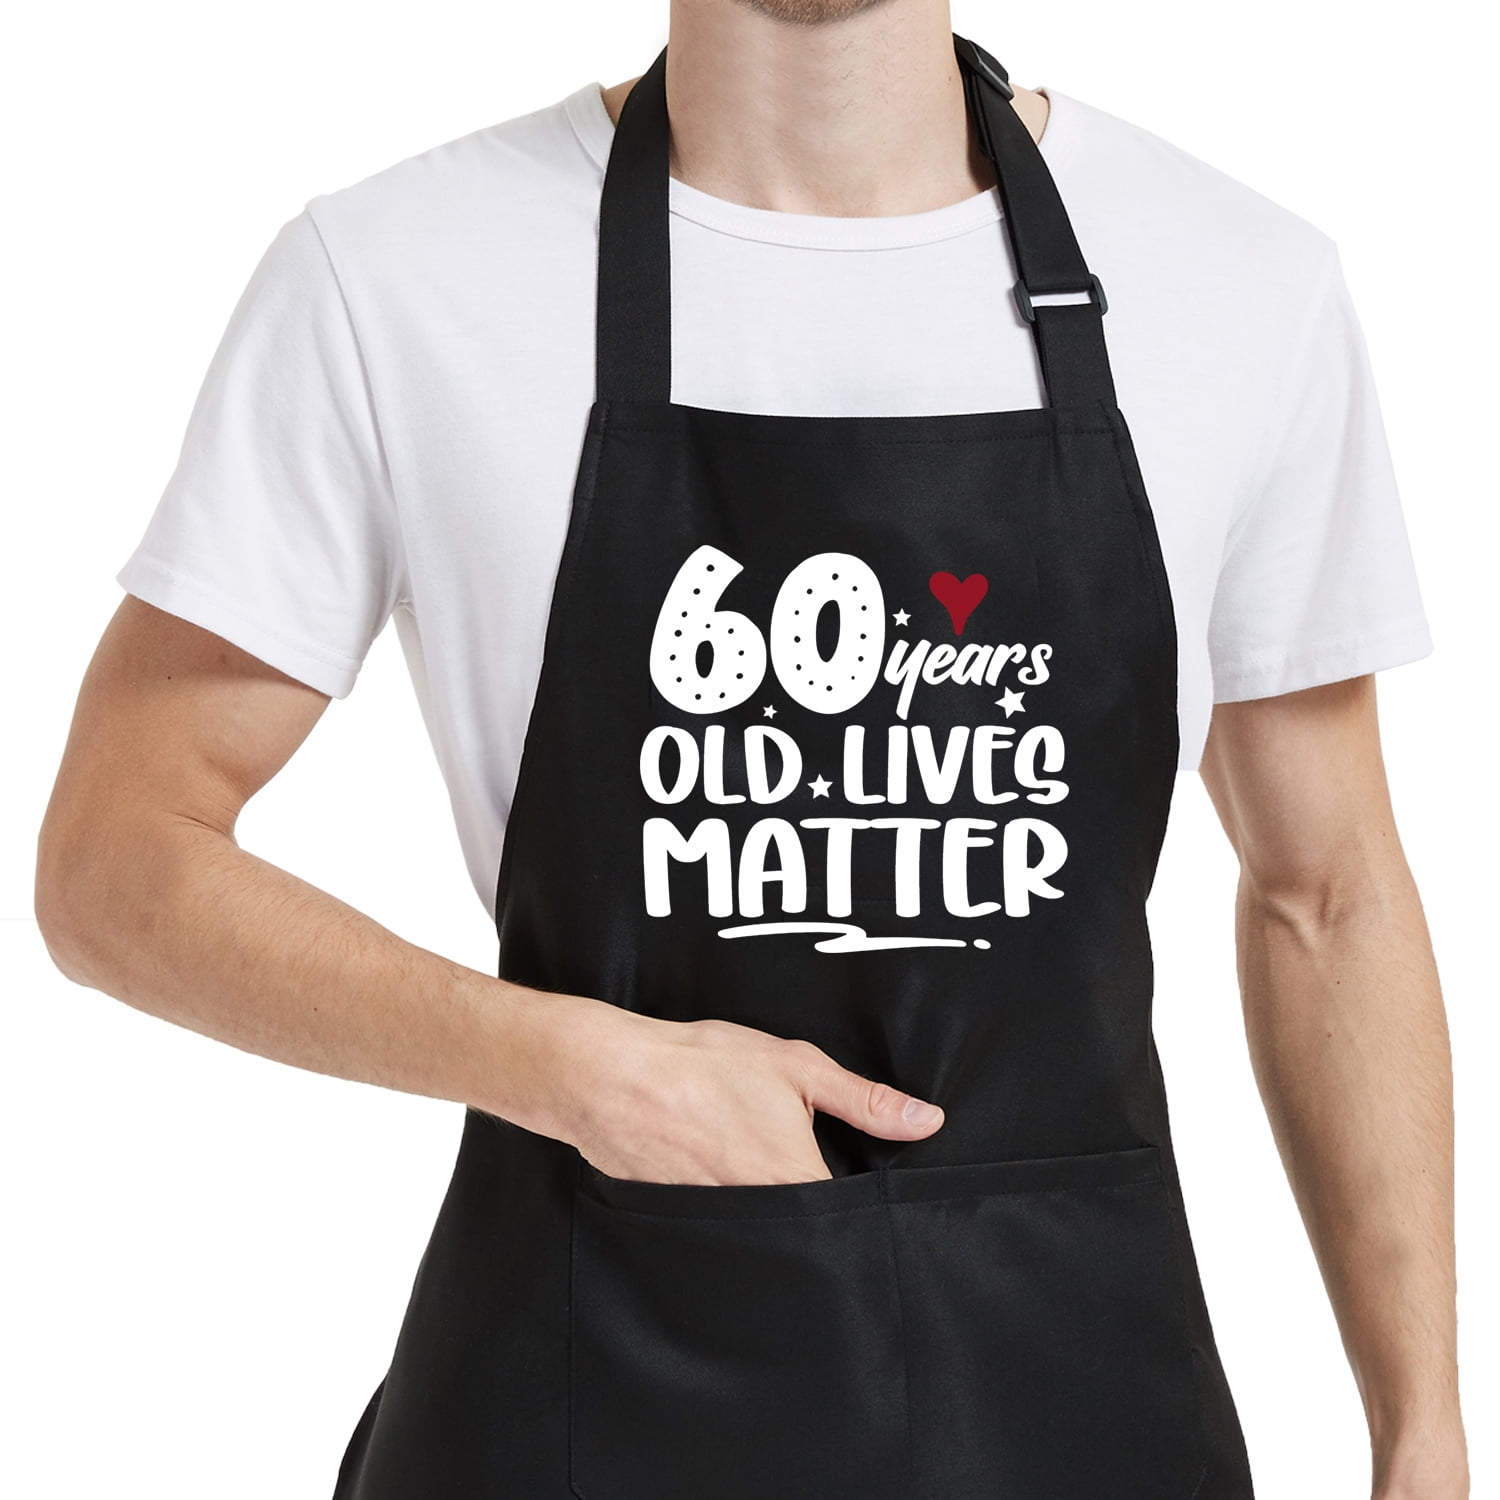 40th 50th 60th Birthday Gifts for Women Men, Funny Chef Apron for Women  Men